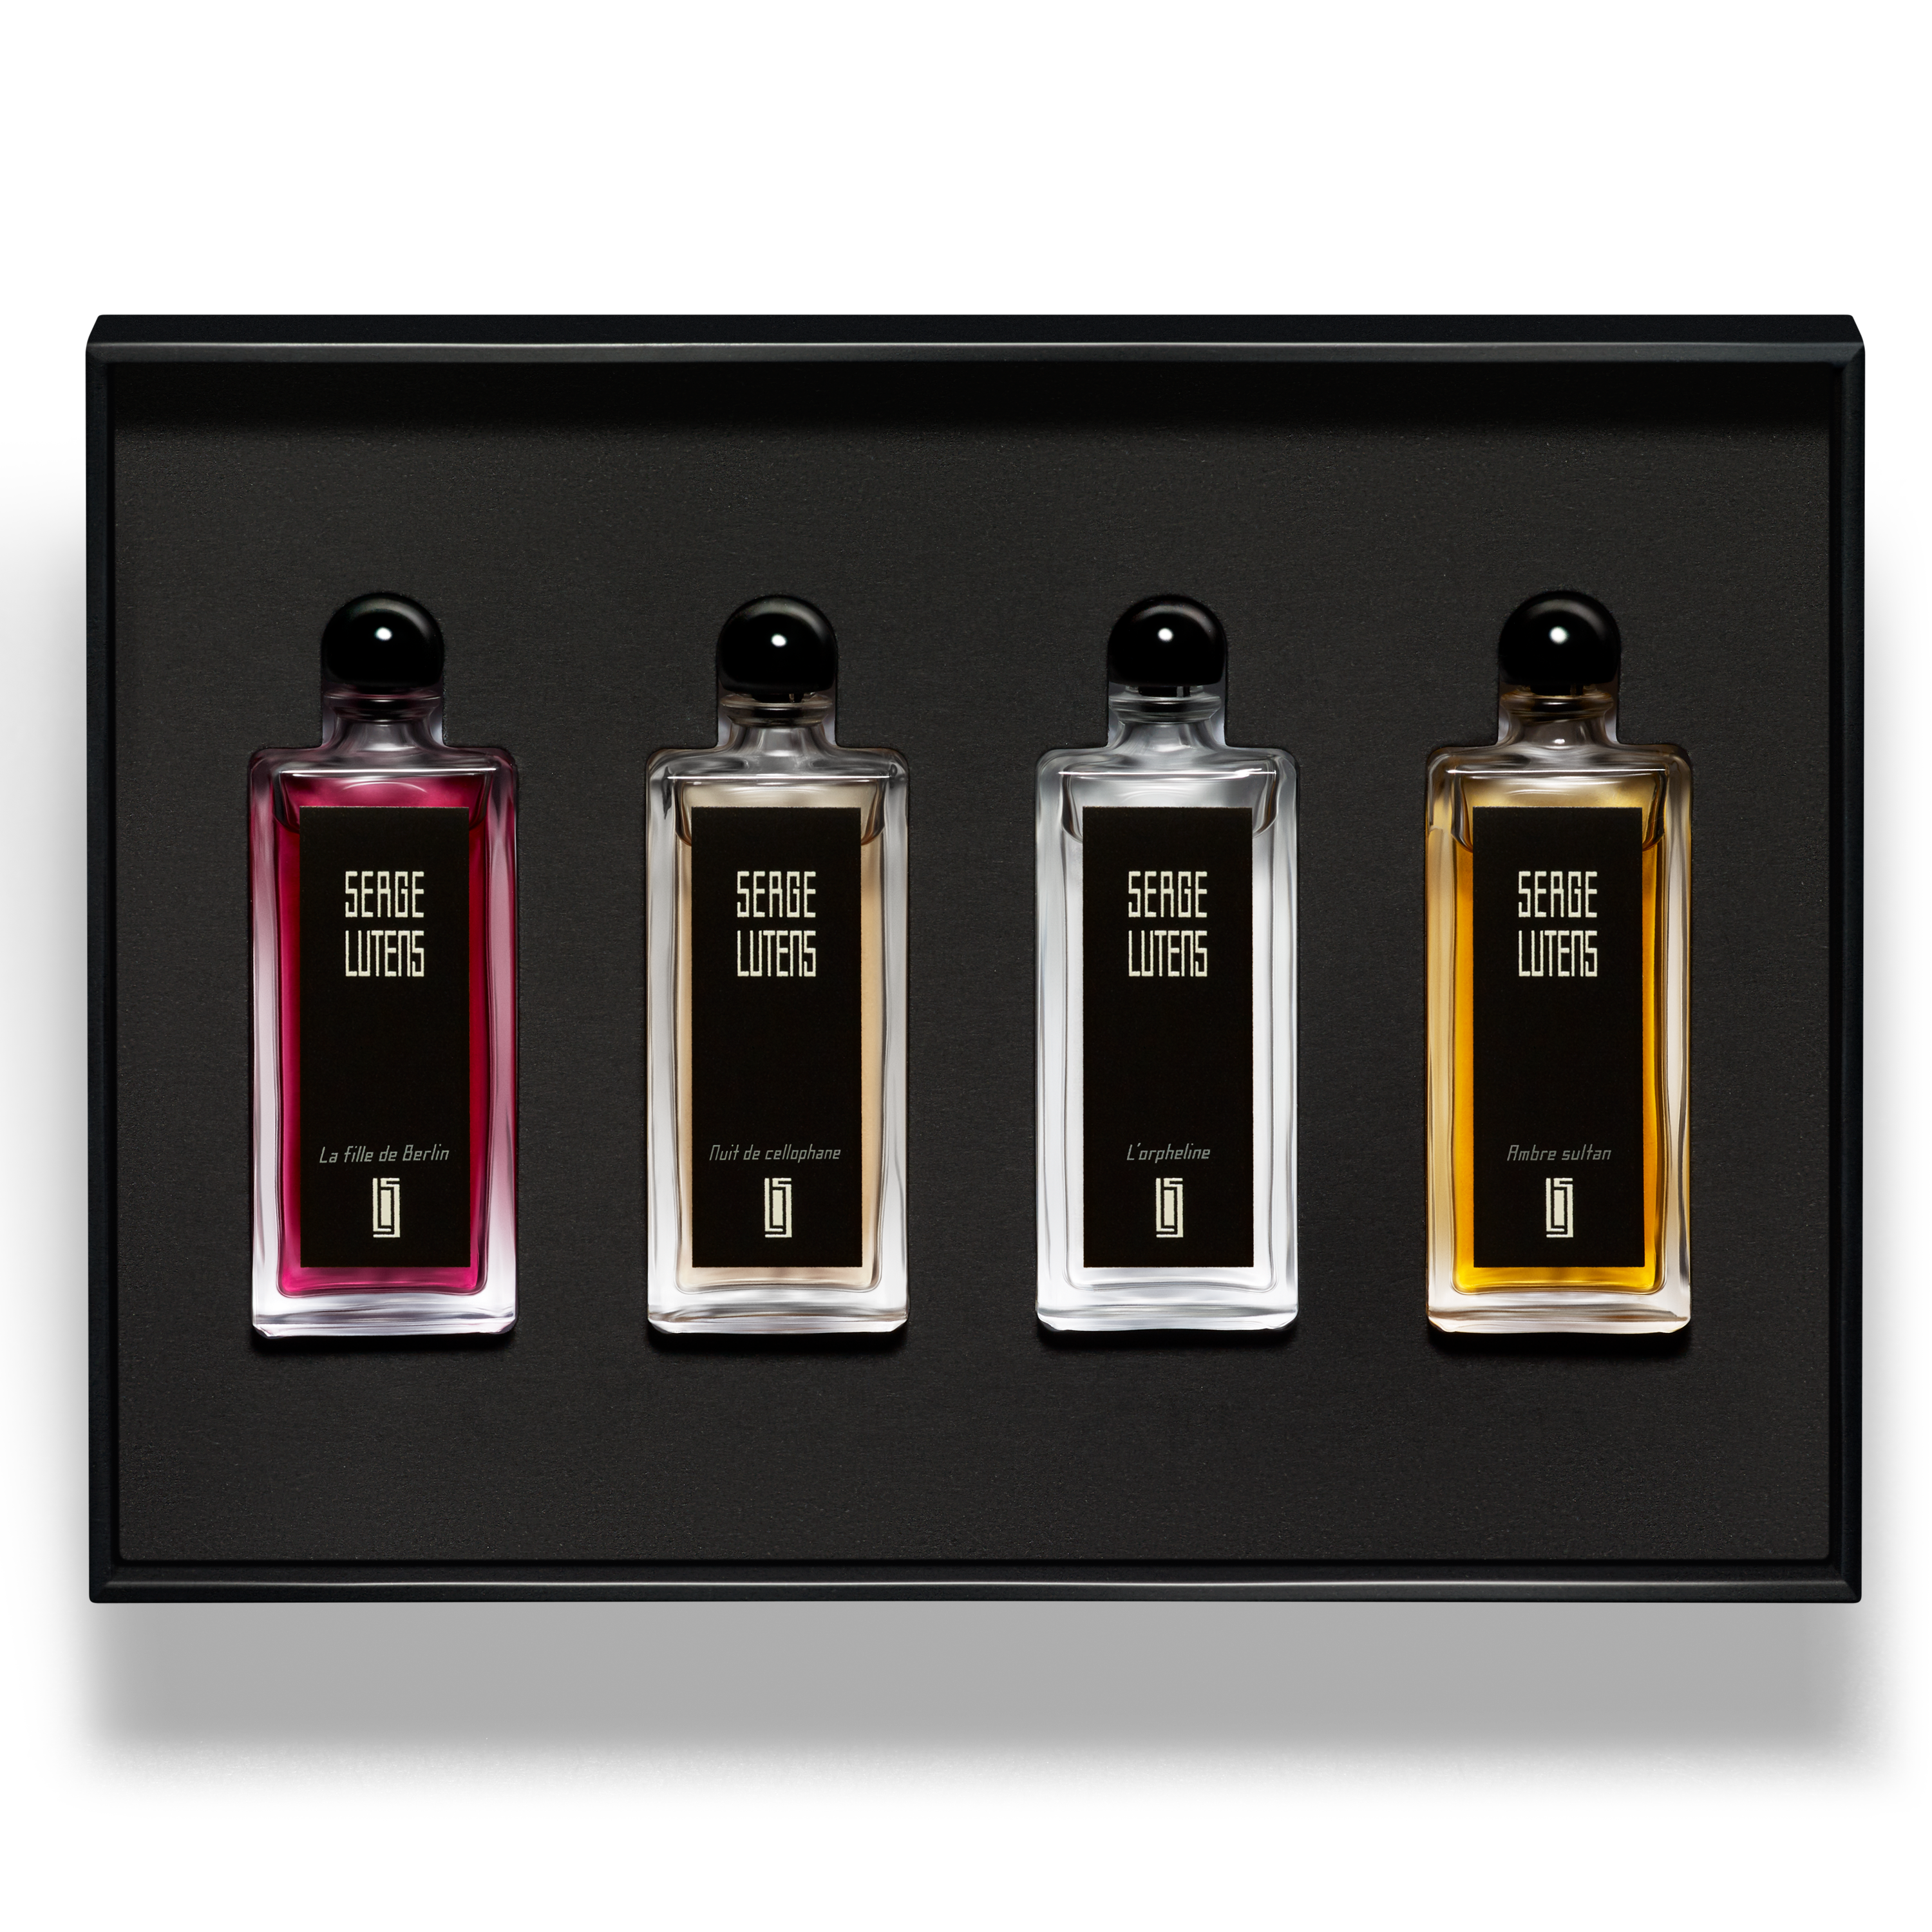 Fragrance collection a tribute to home and family